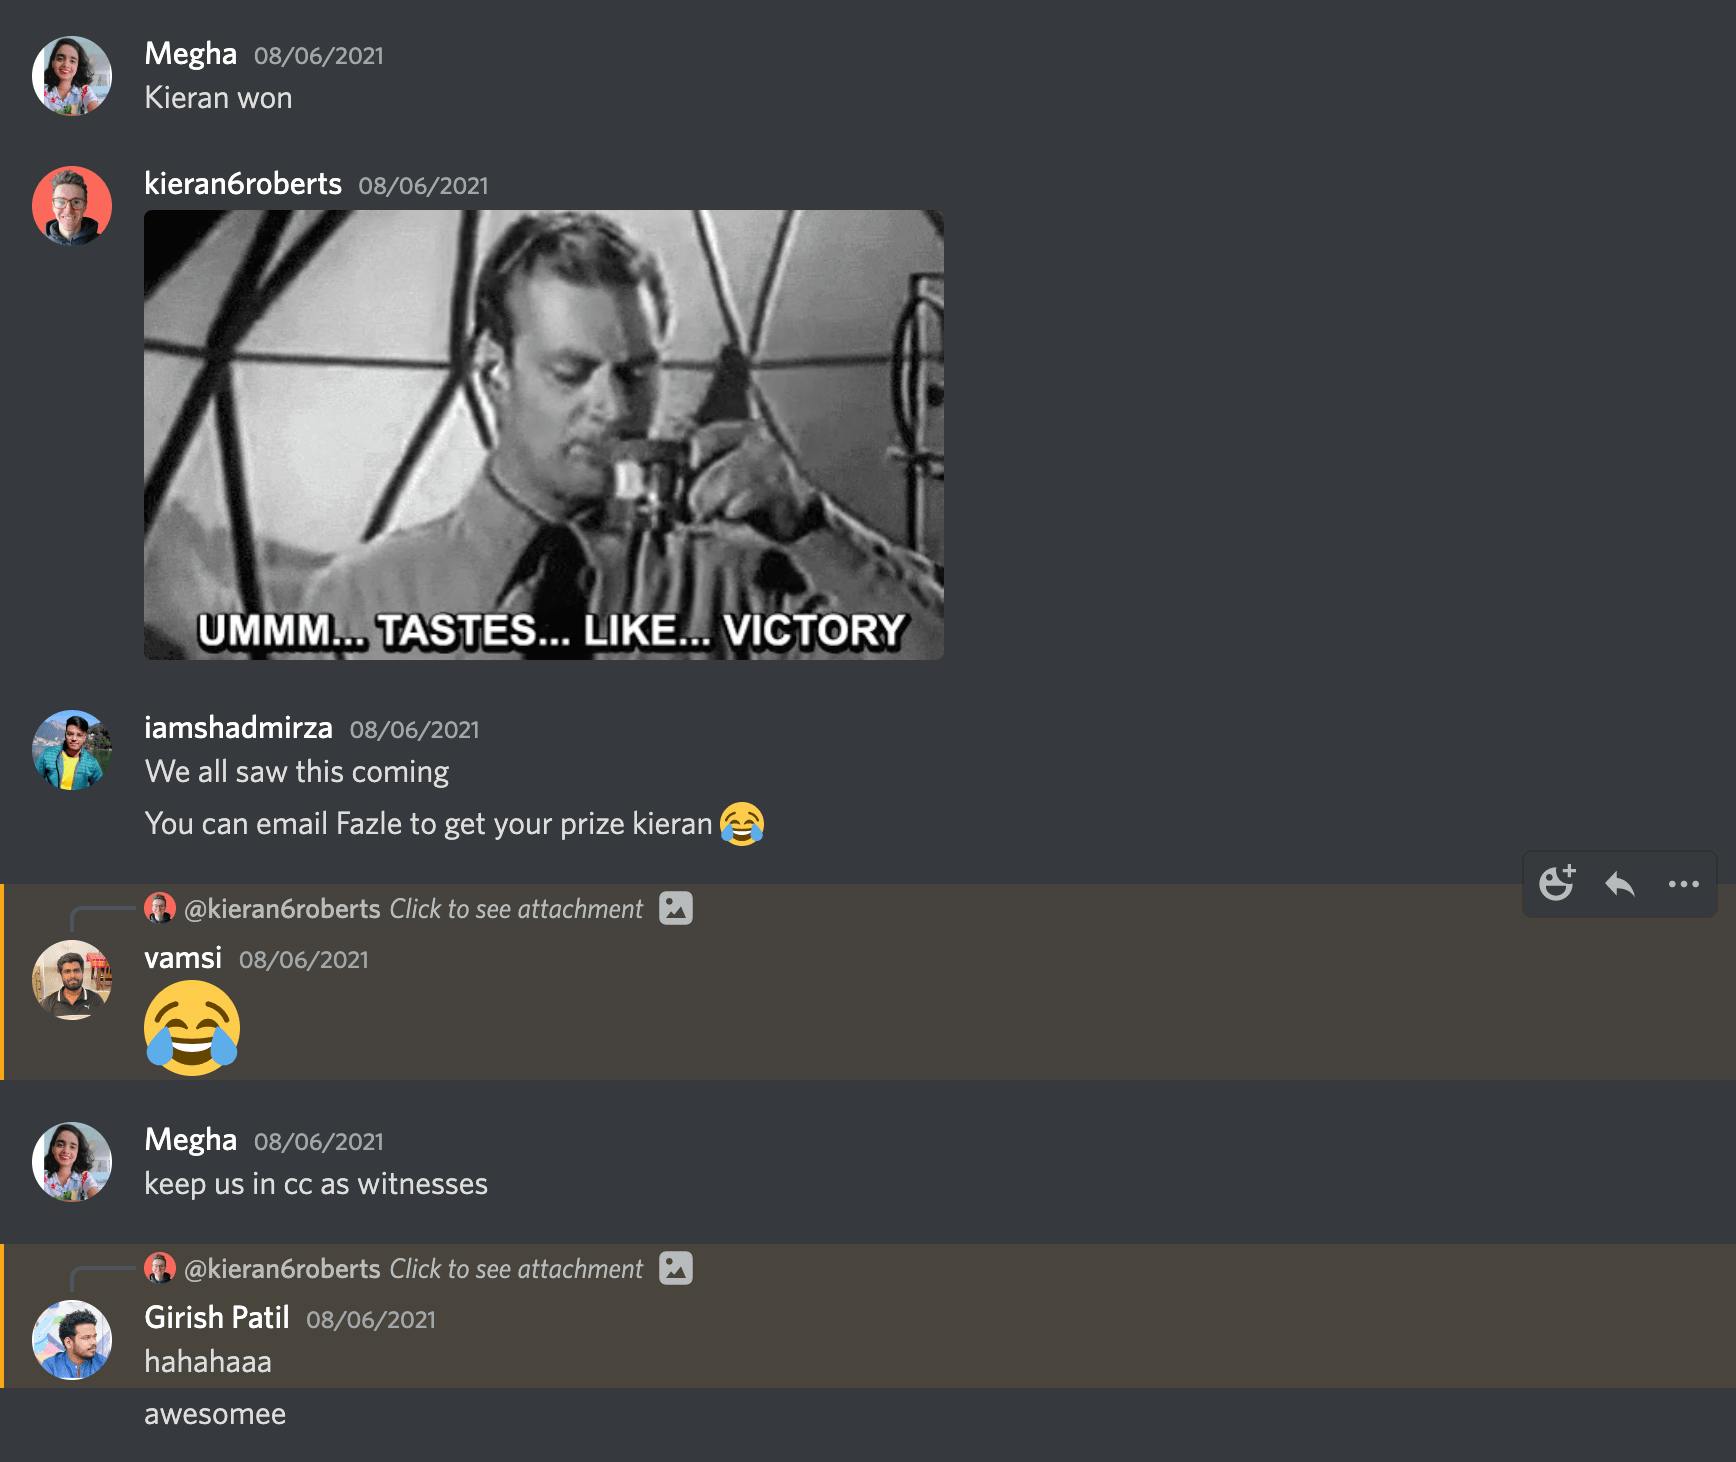 Discord team chat after I won the game of scribble. Me gloating and the team congratulating. 